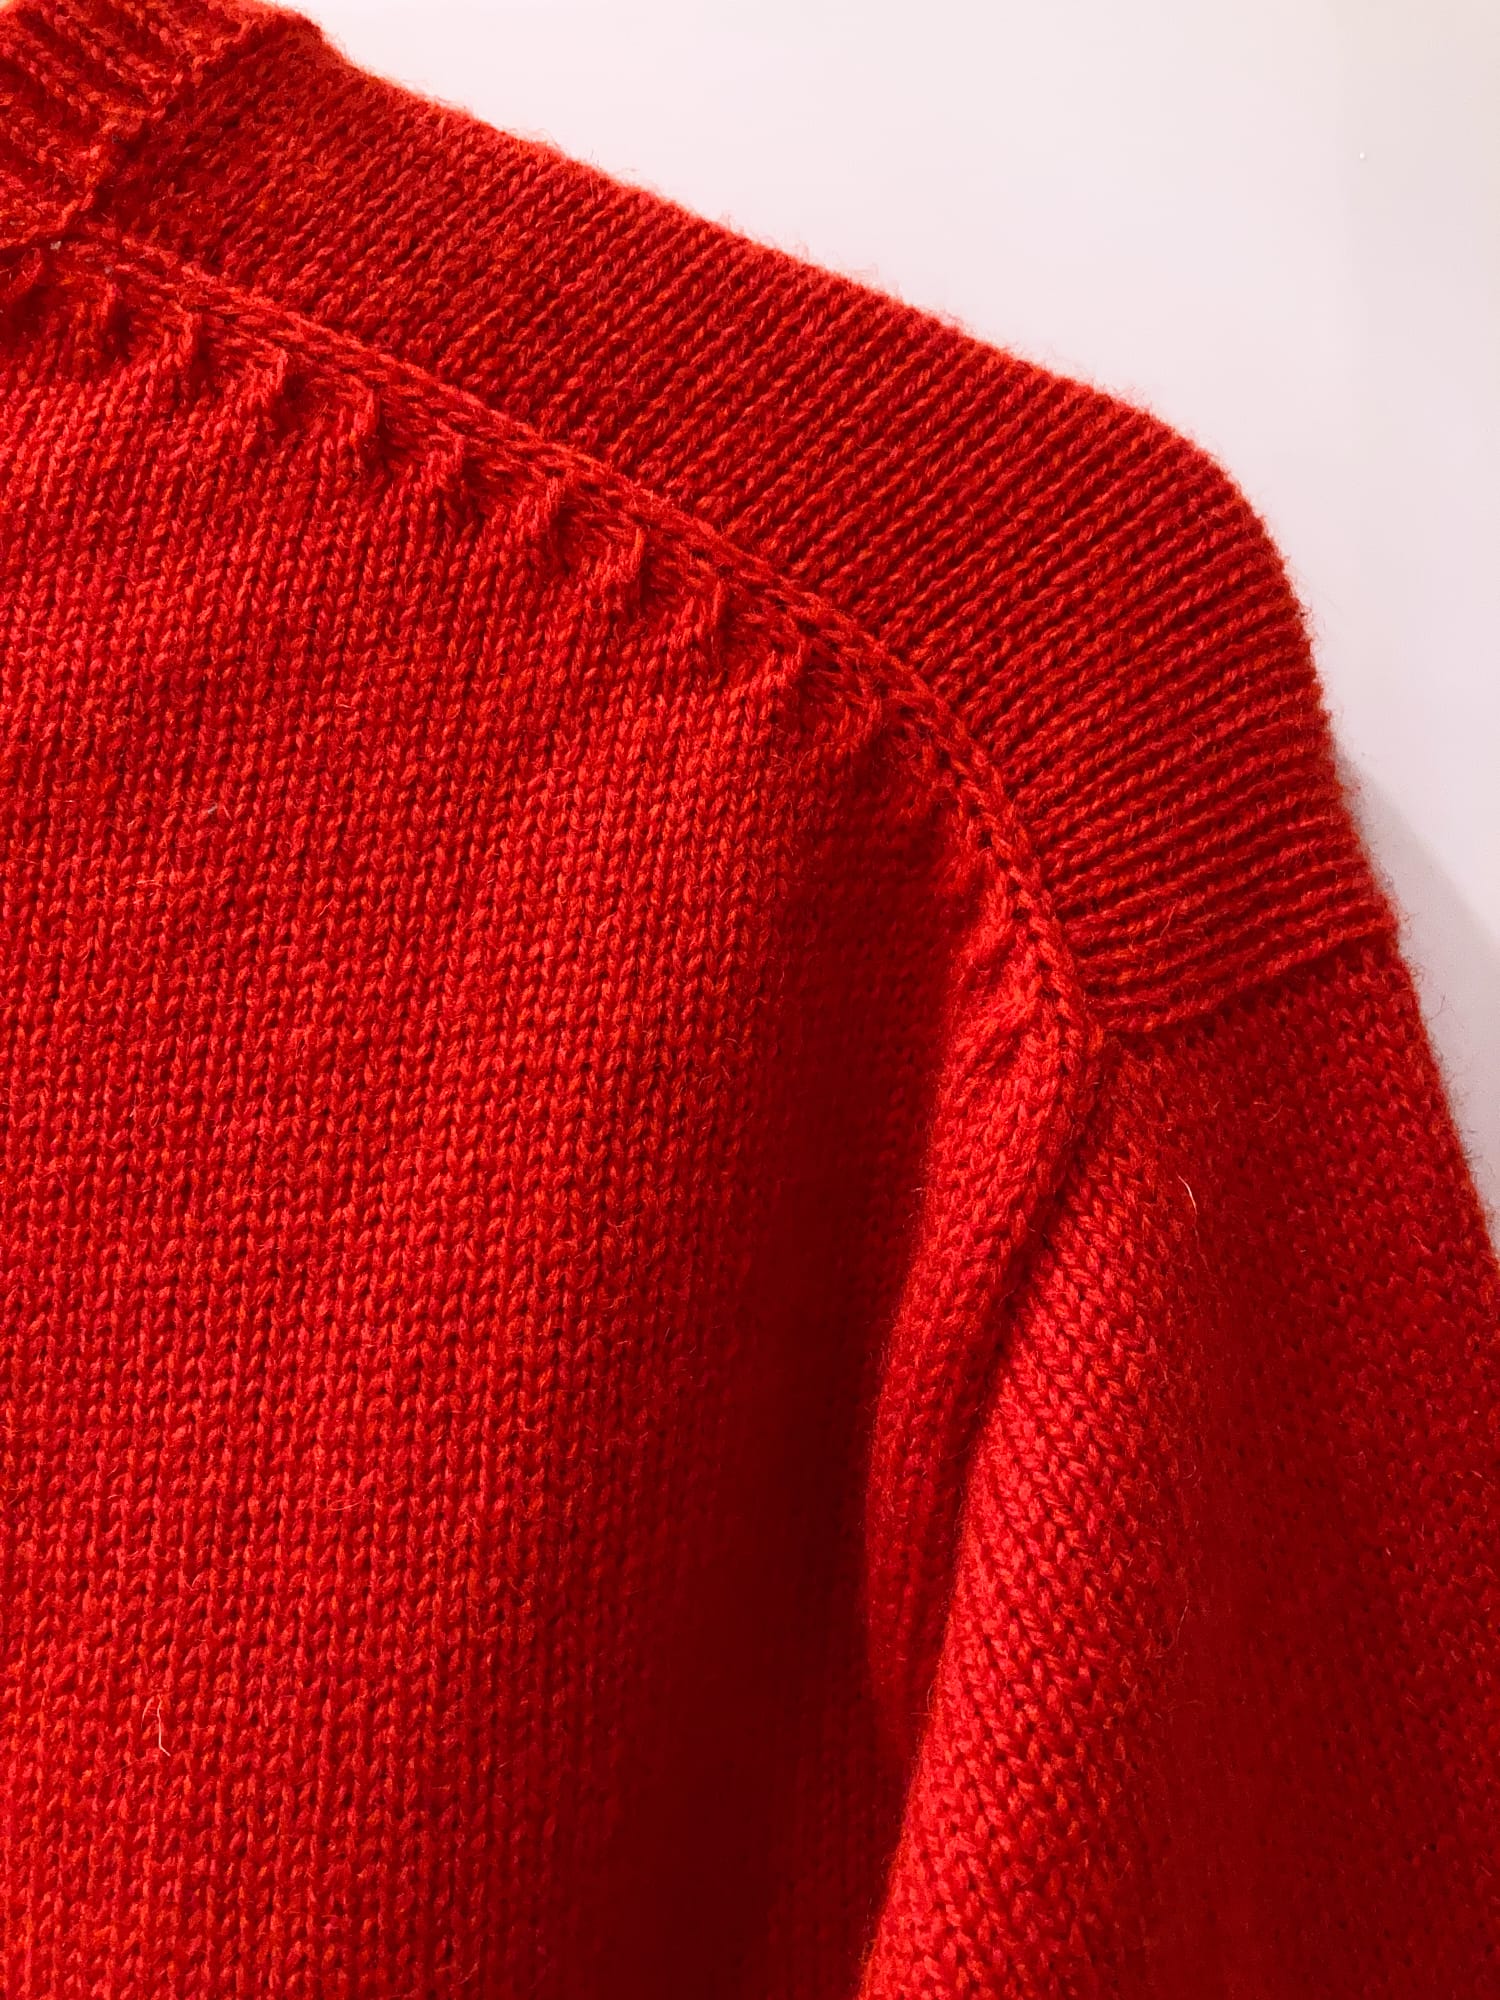 Comme des Garcons Homme 1980s red wool knitted crew neck jumper